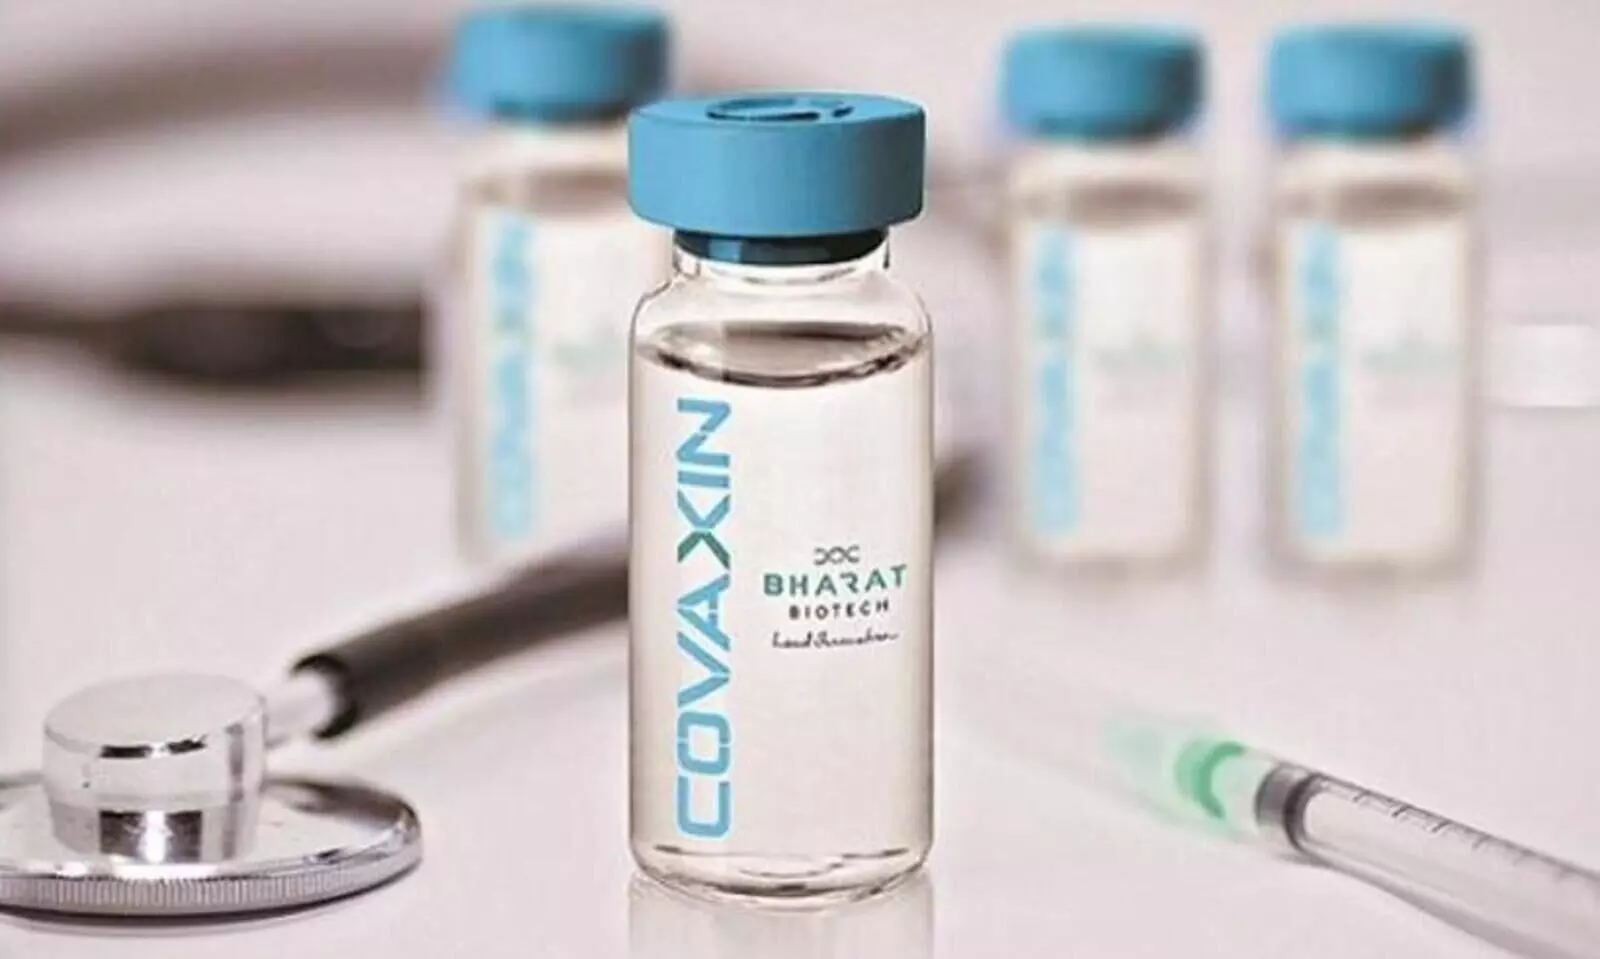 Covaxin efficacy meets WHO standards, safe to use, says Joint Drugs Controller